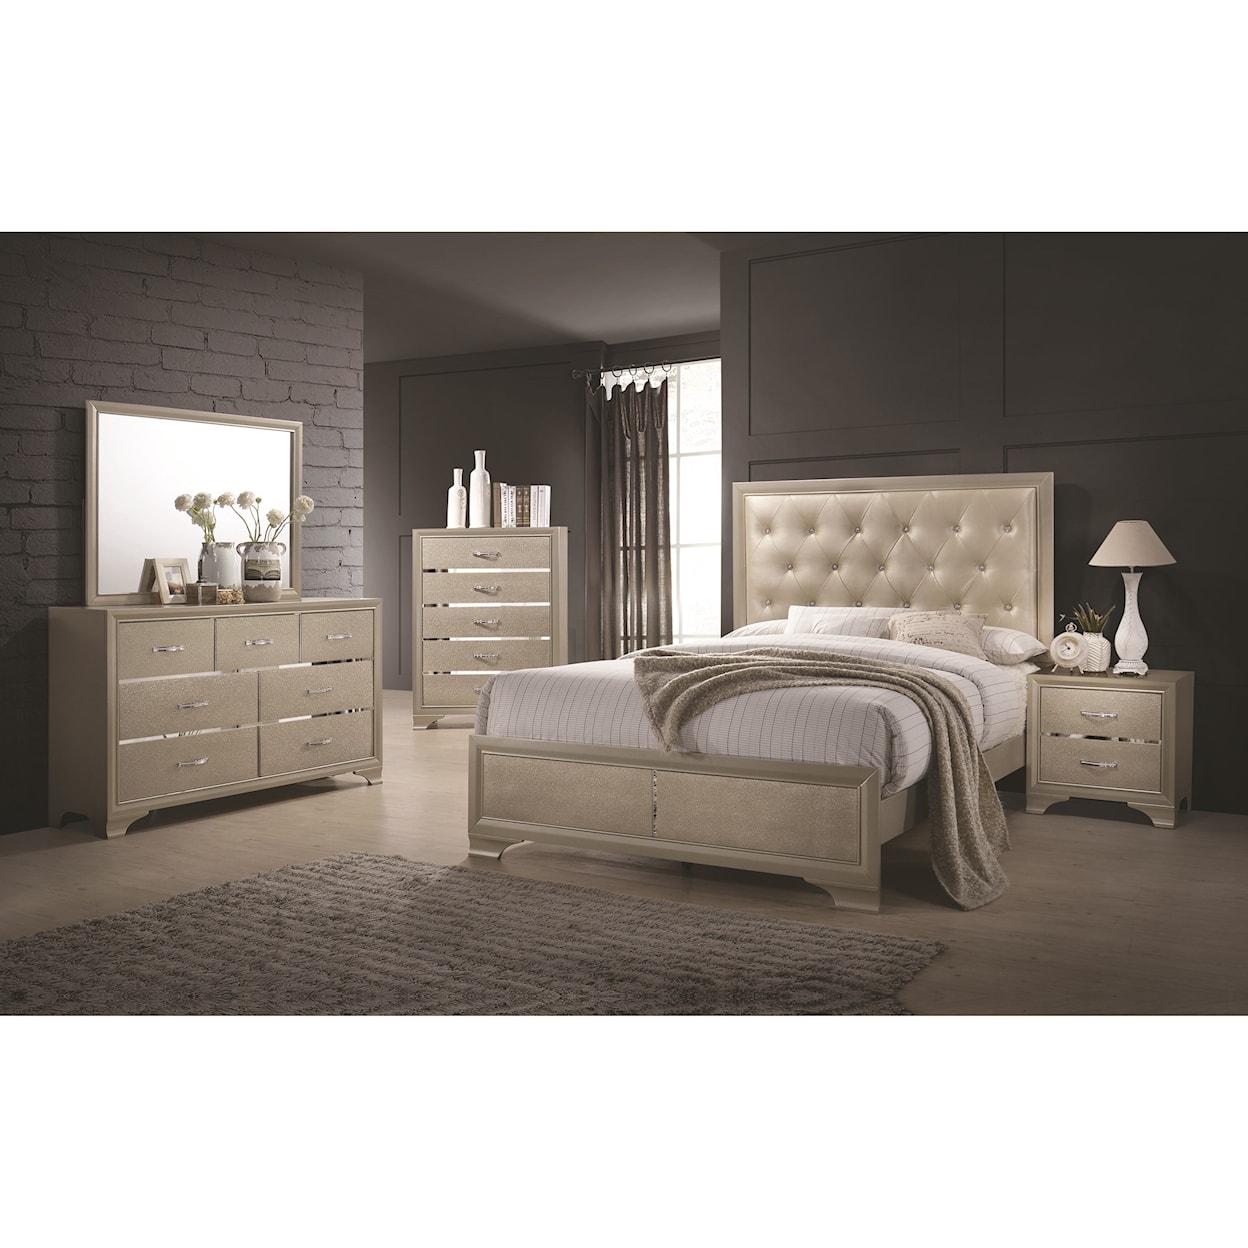 Coaster Beaumont King Bedroom Group